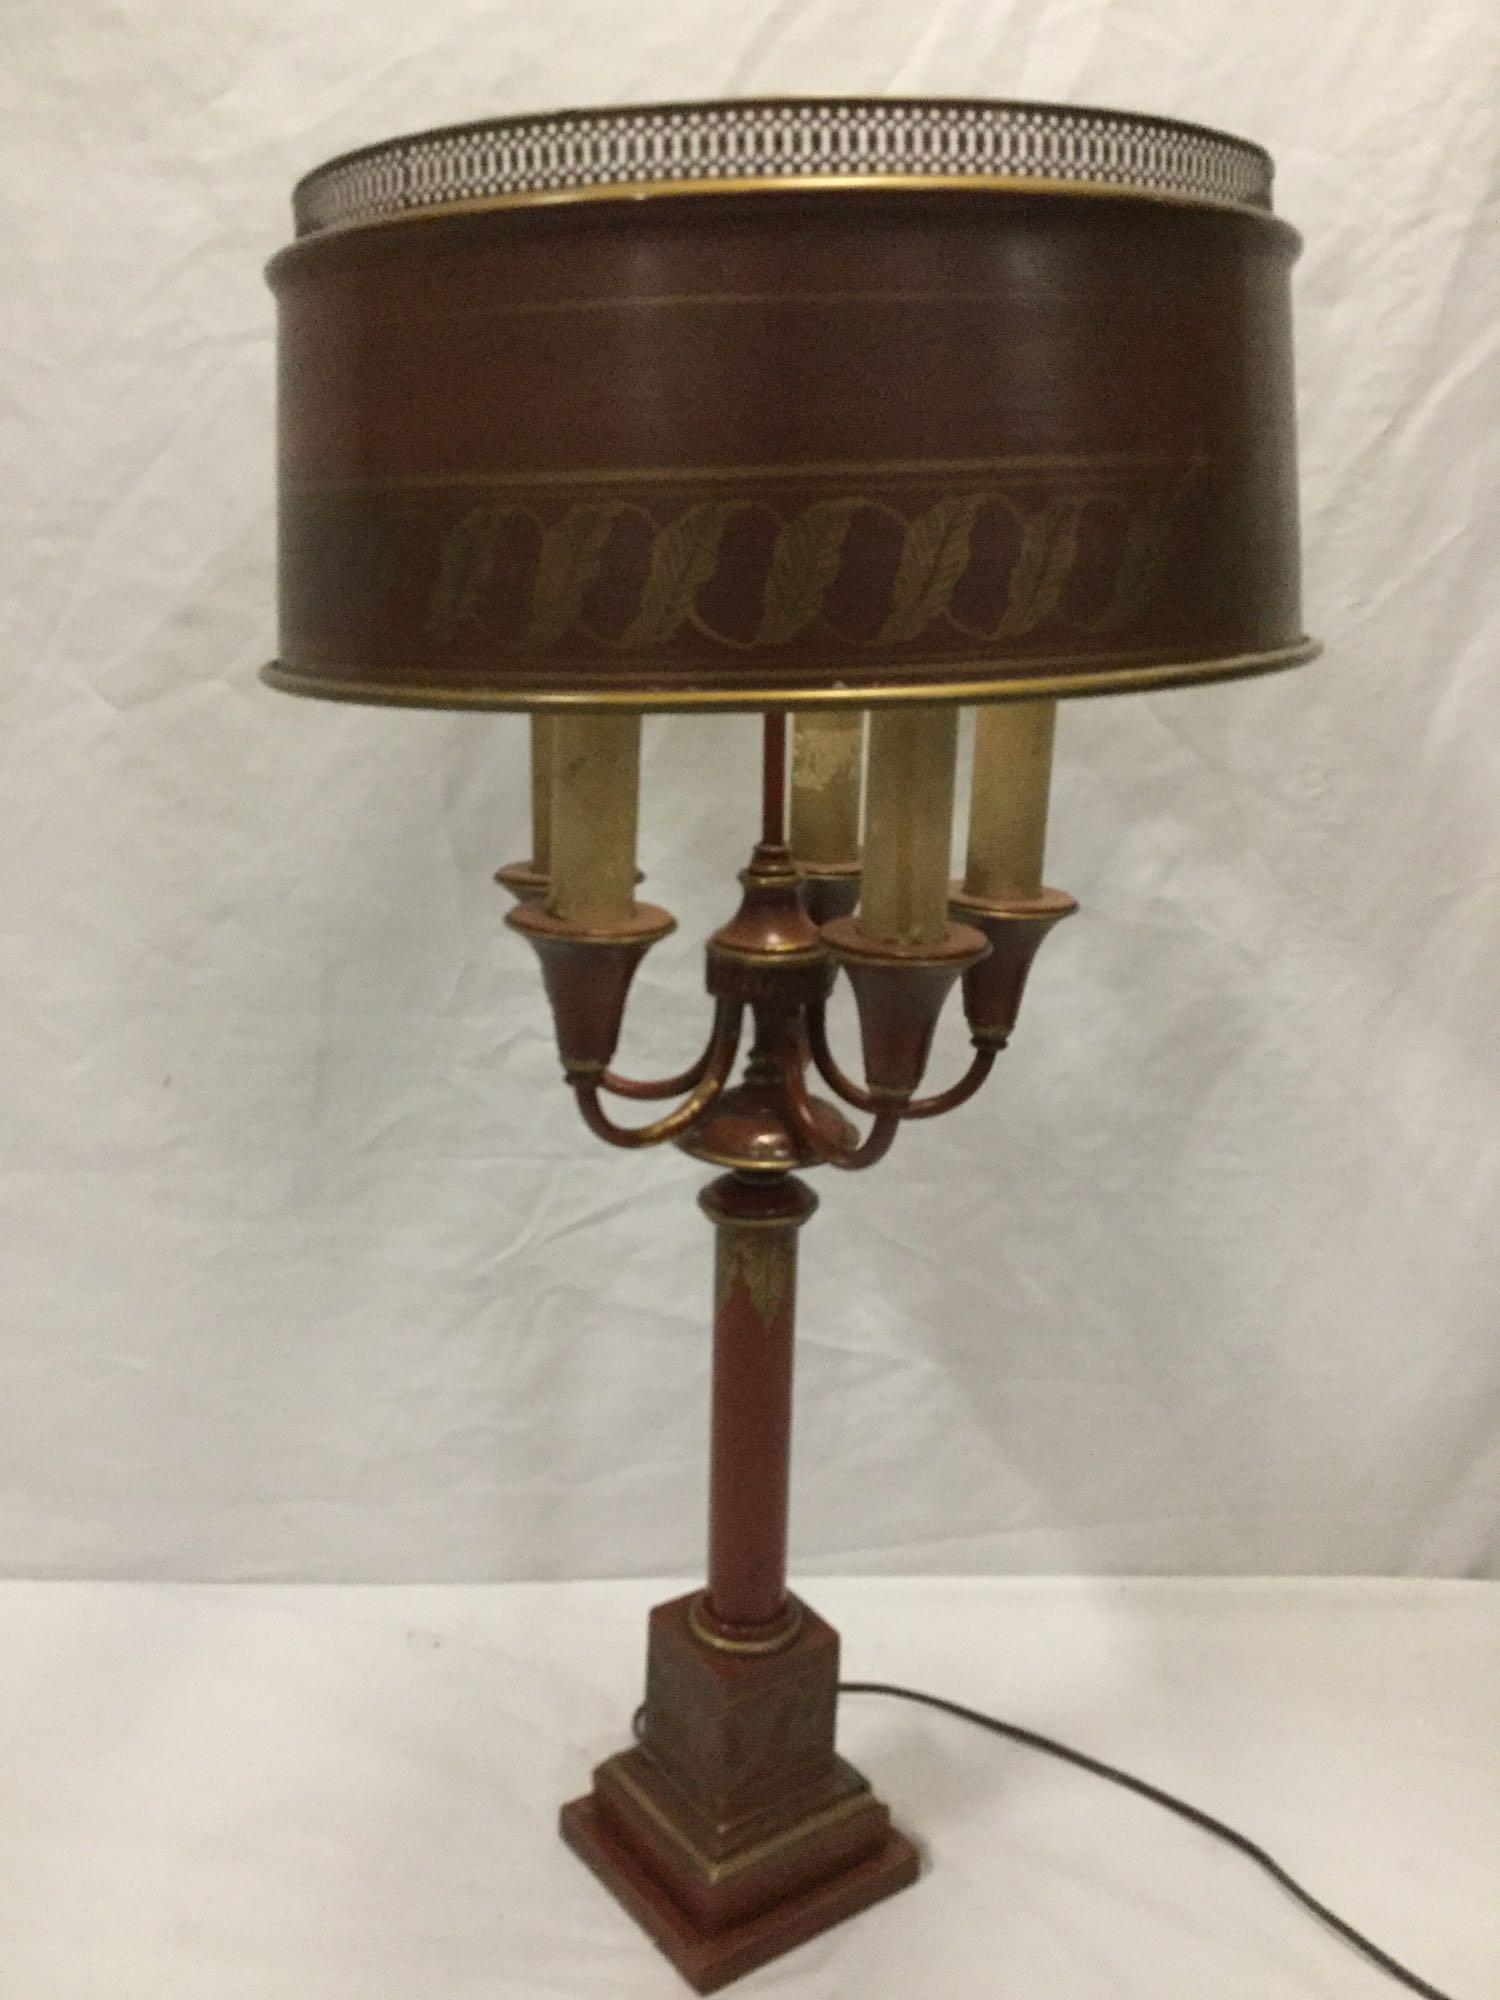 Modern metal art deco style metal table lamp with ornate shade and candelabra design, sold as is